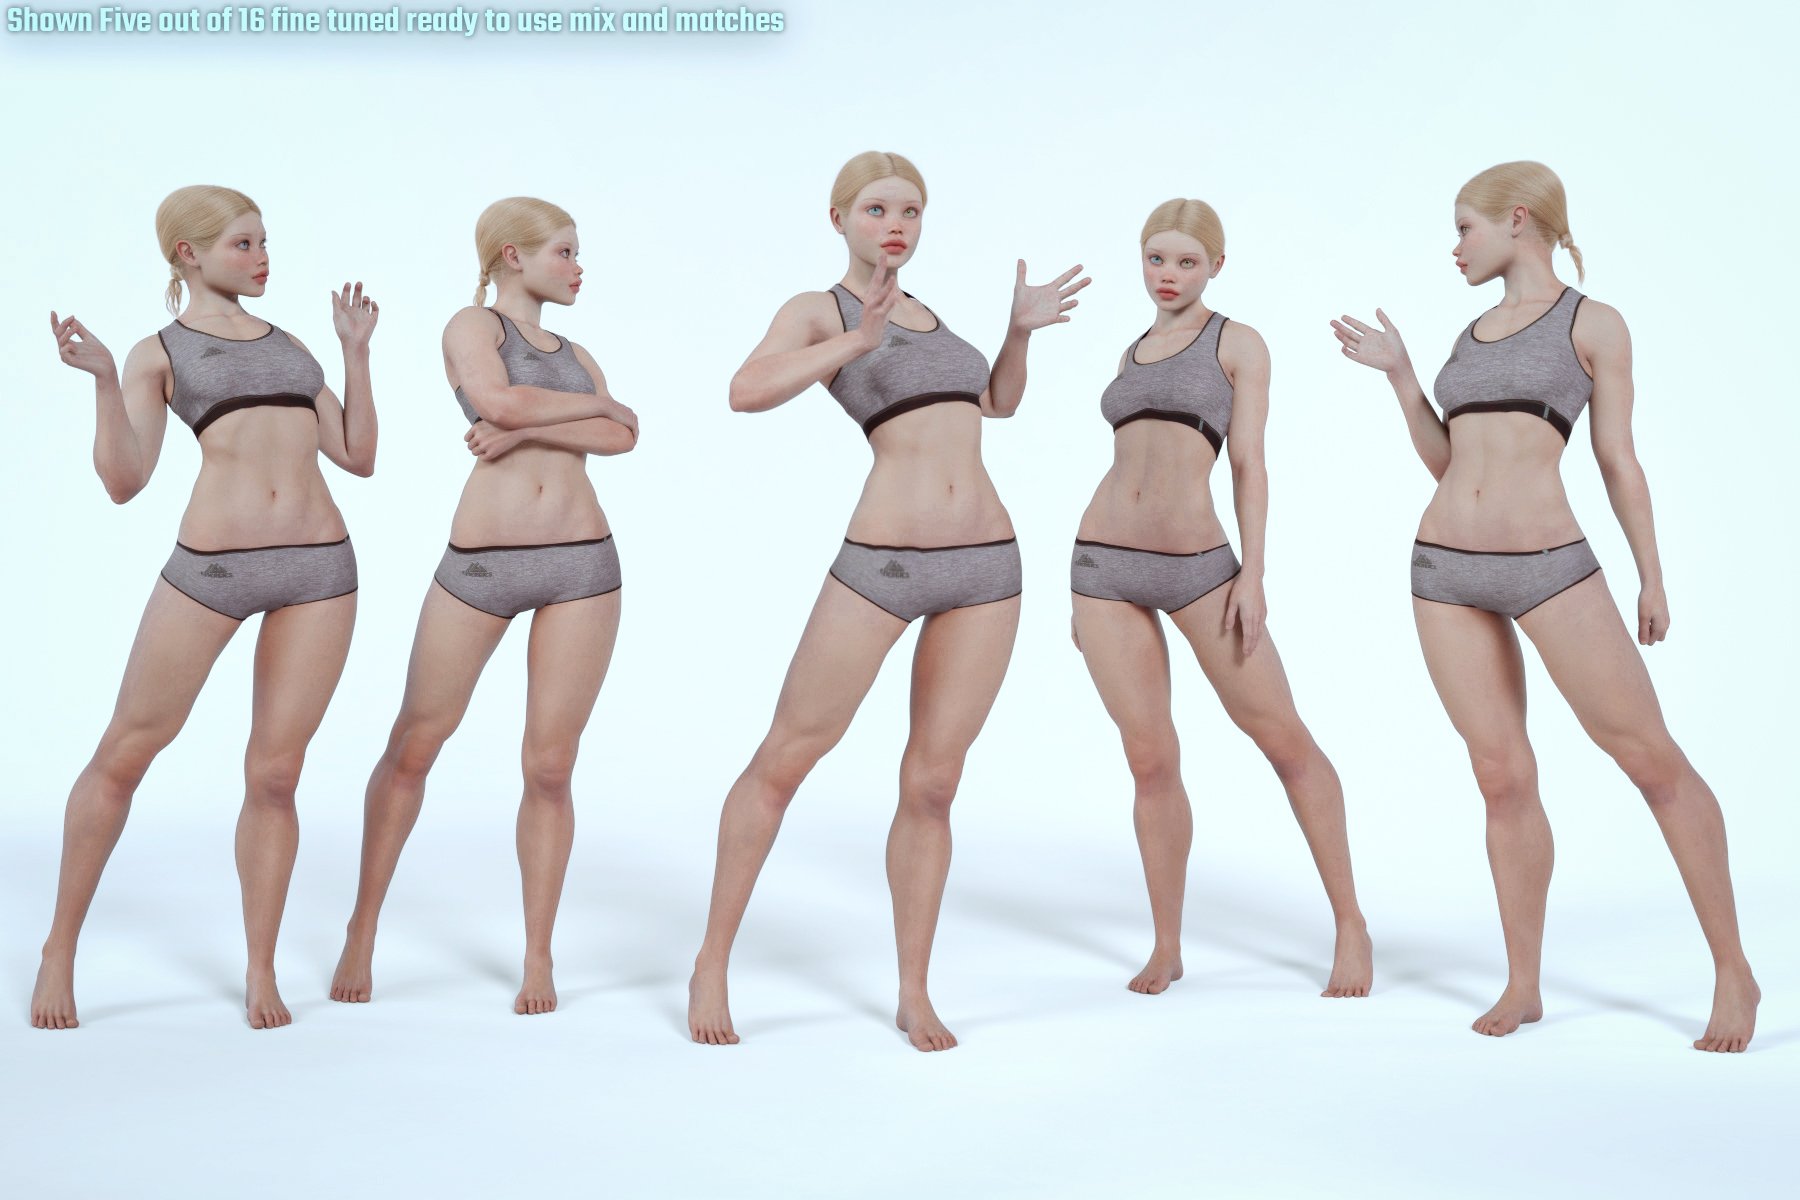 Charming Standing Poses for Genesis 8 and 8.1 Females by: Aeon Soul, 3D Models by Daz 3D